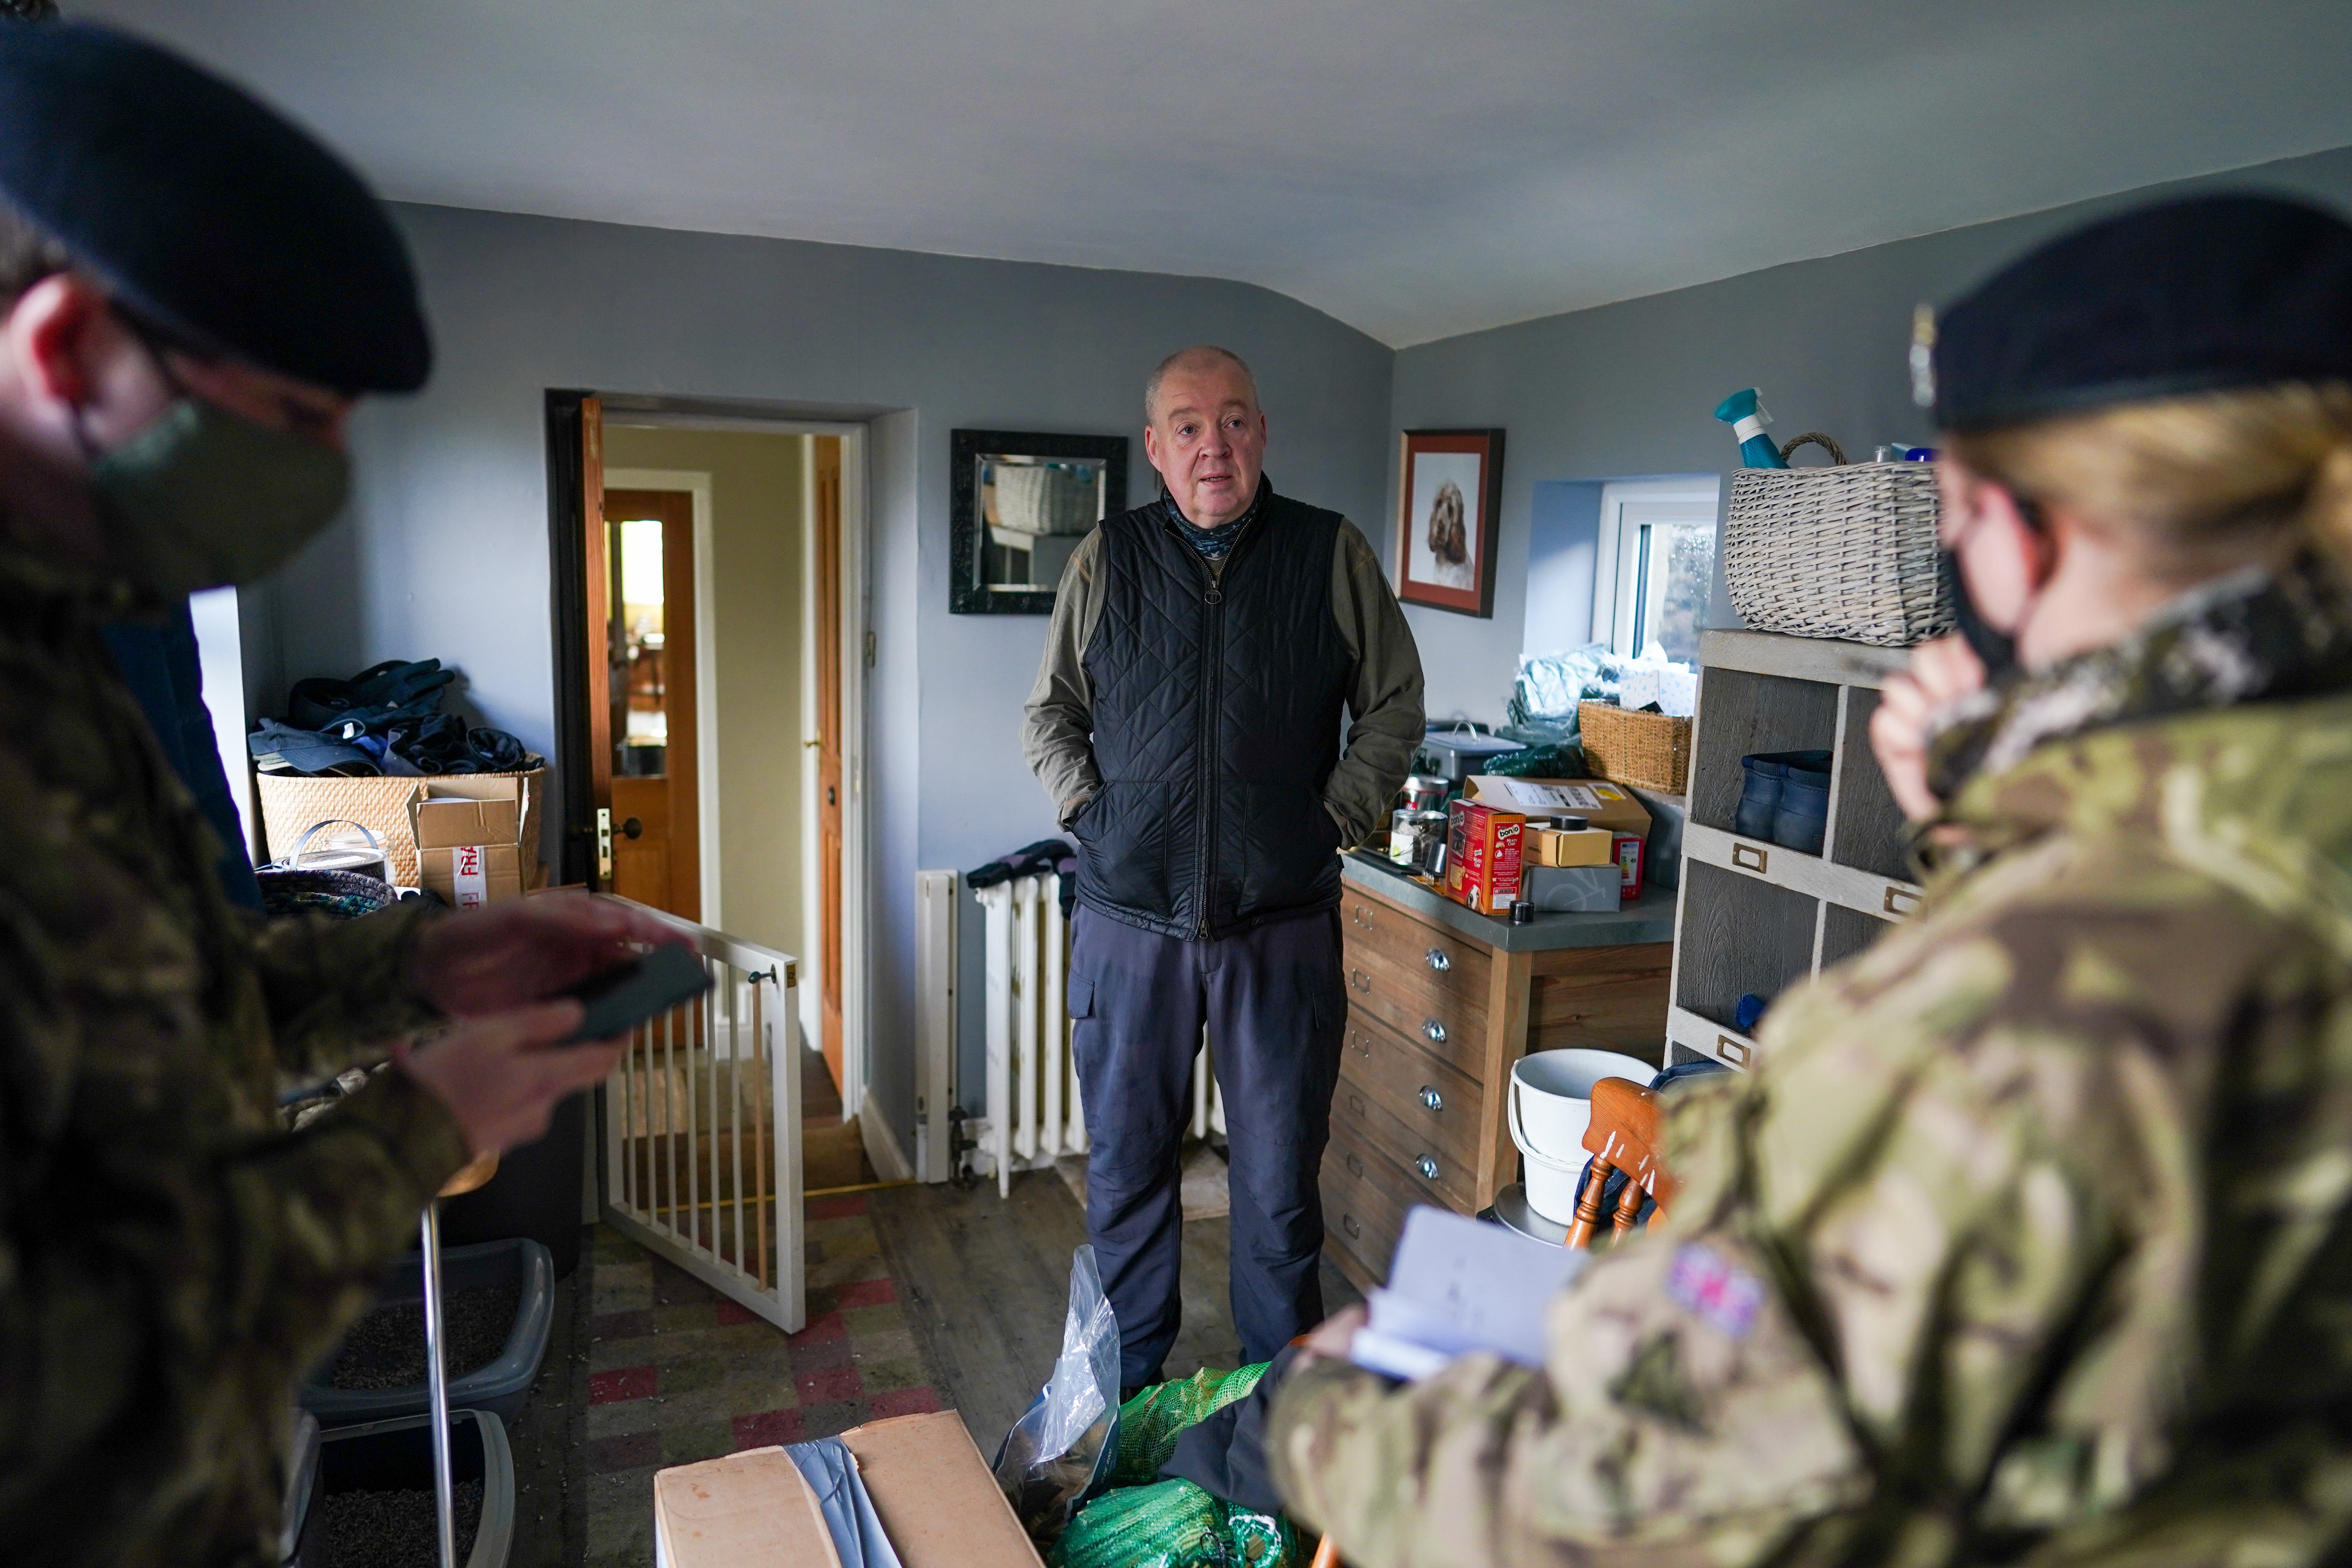 Soldiers carry out welfare checks at a remote property that remains without power in County Durham